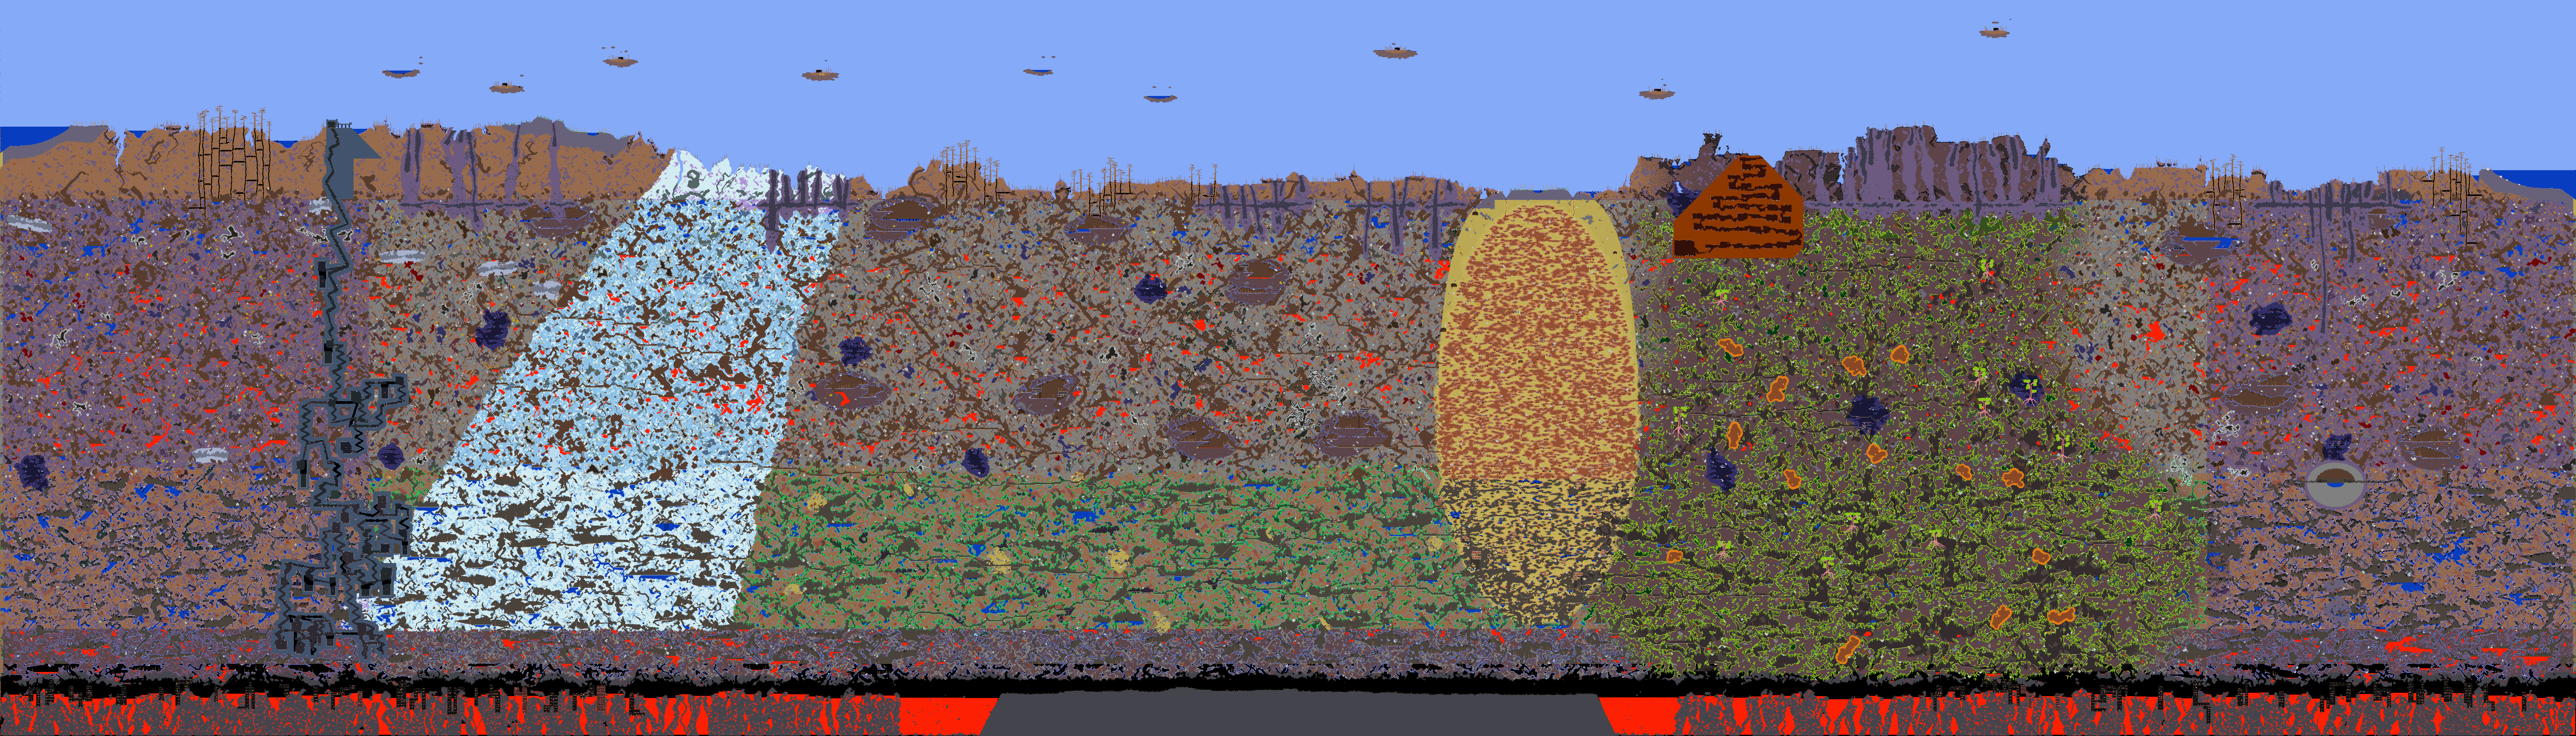 Terraria Map Seeds That Make The Game Even Harder